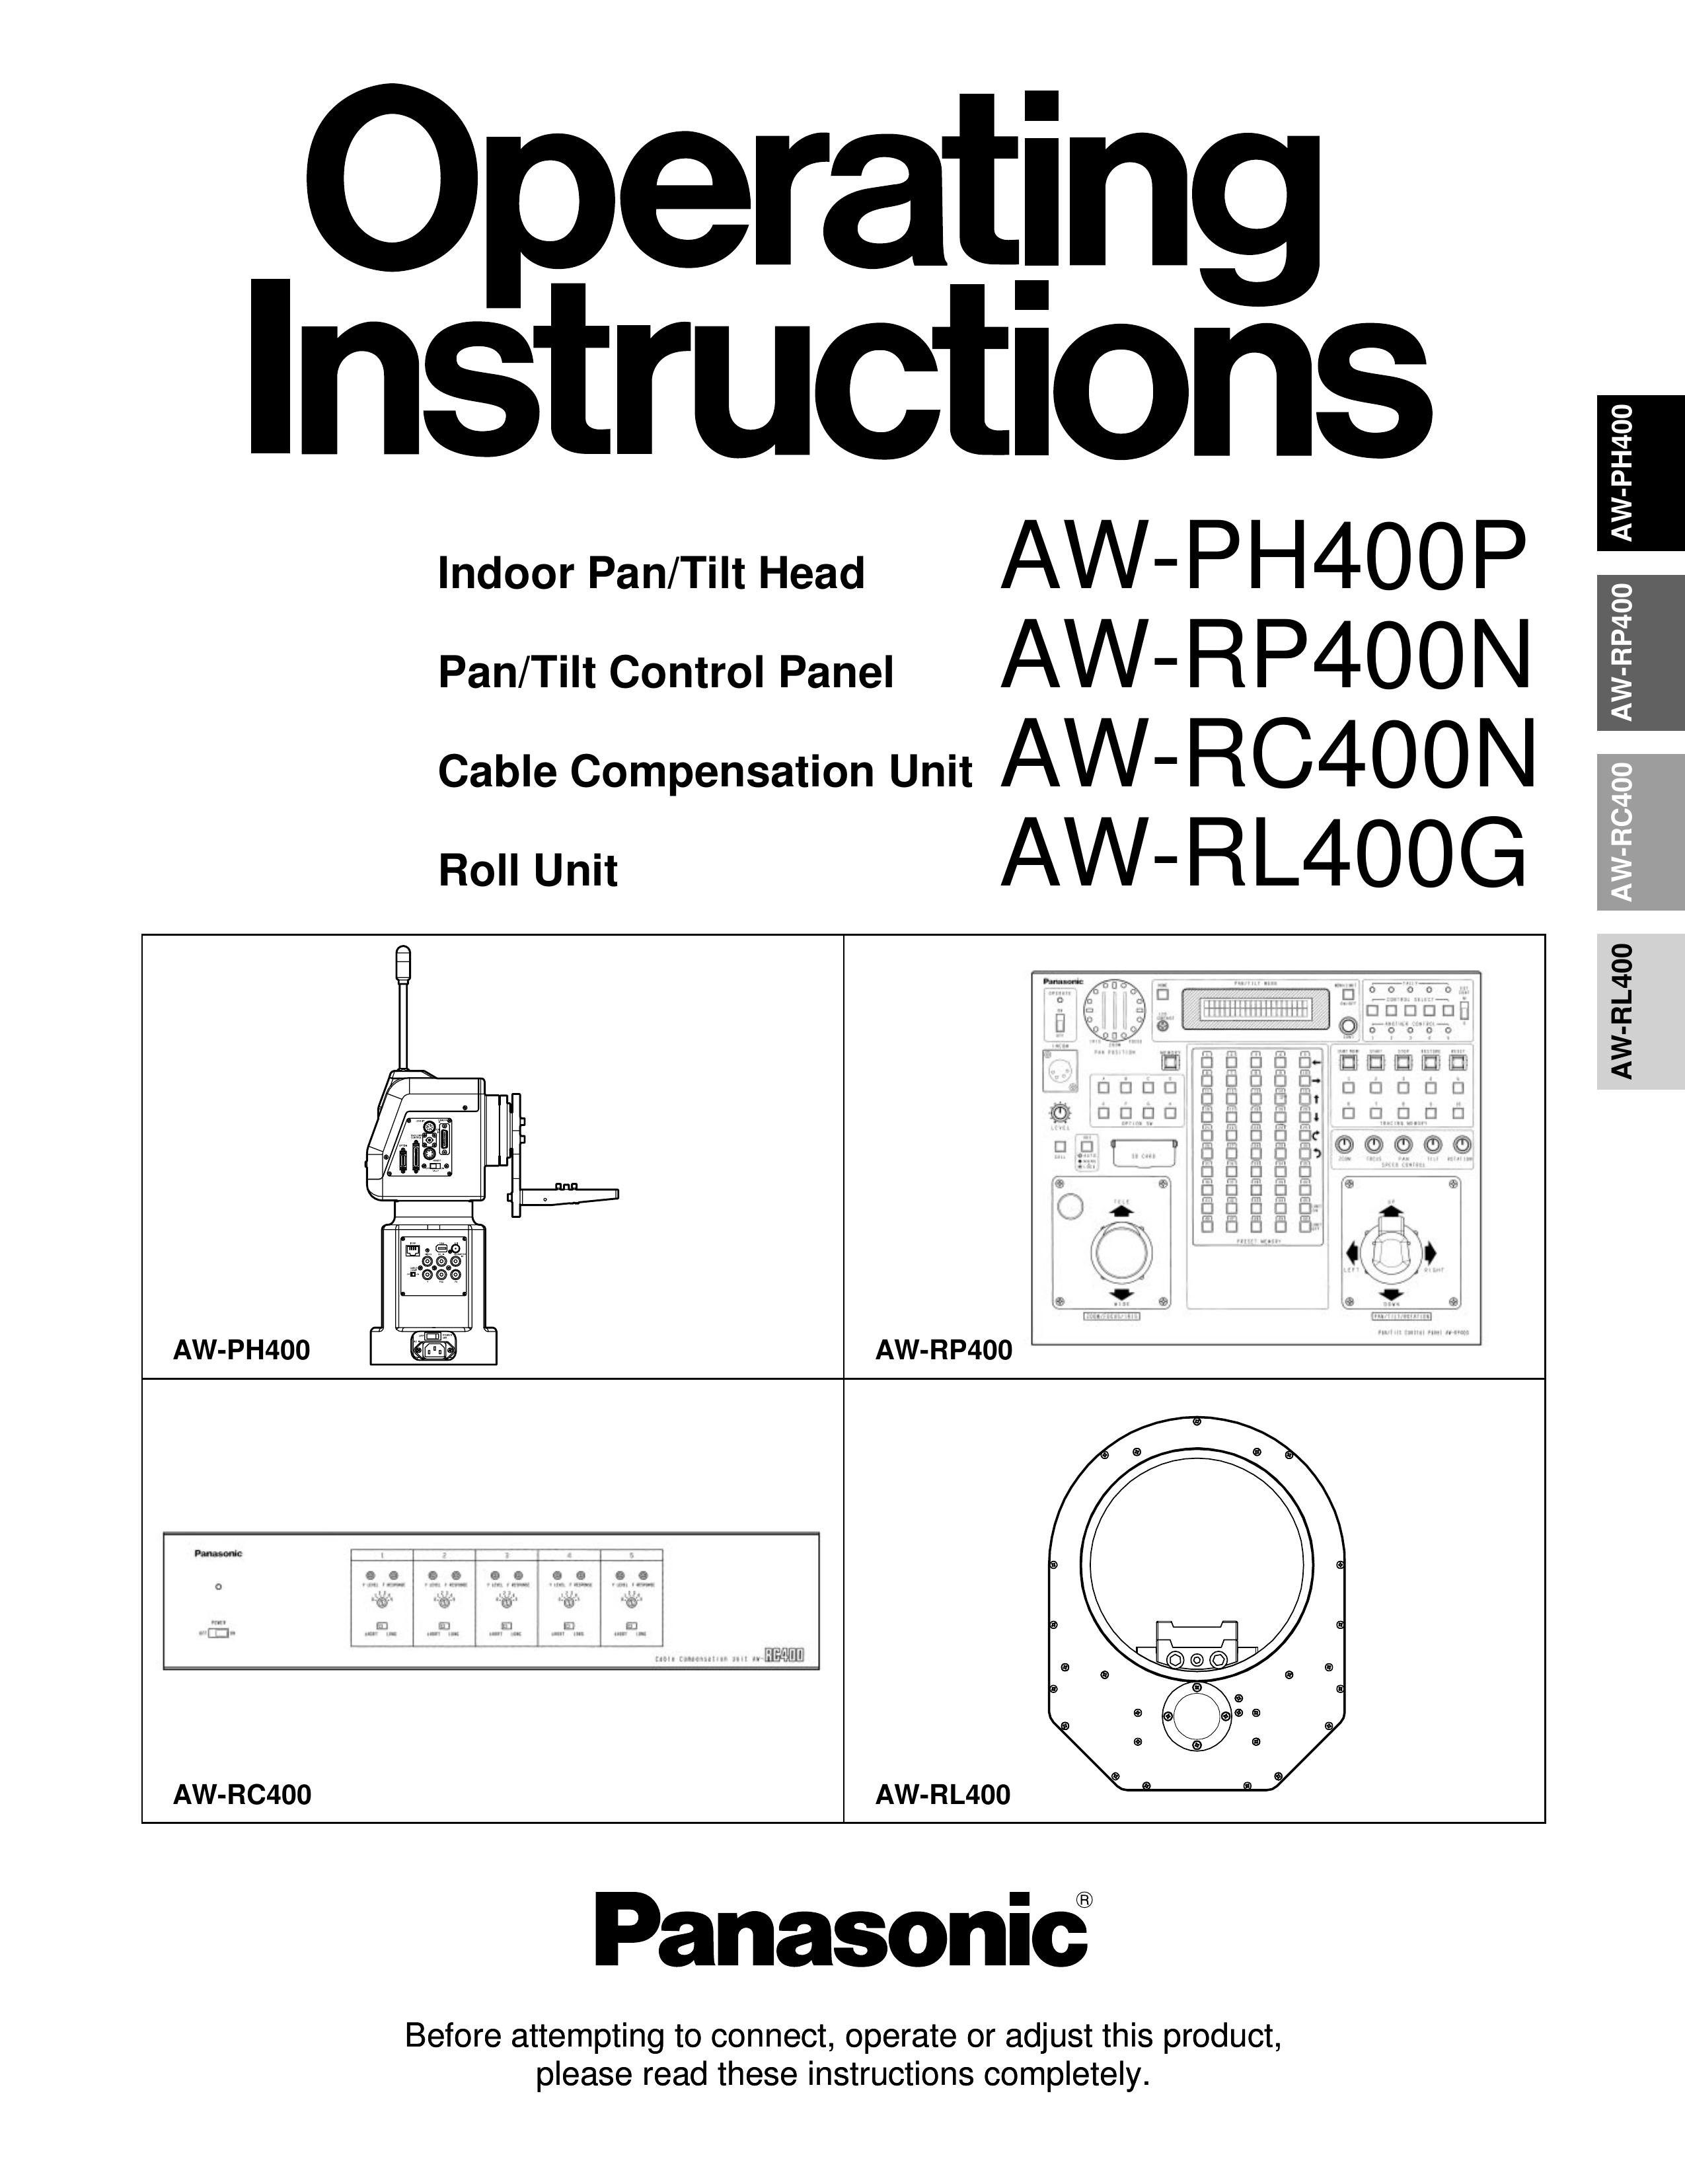 Panasonic AW-RC400 Camcorder Accessories User Manual